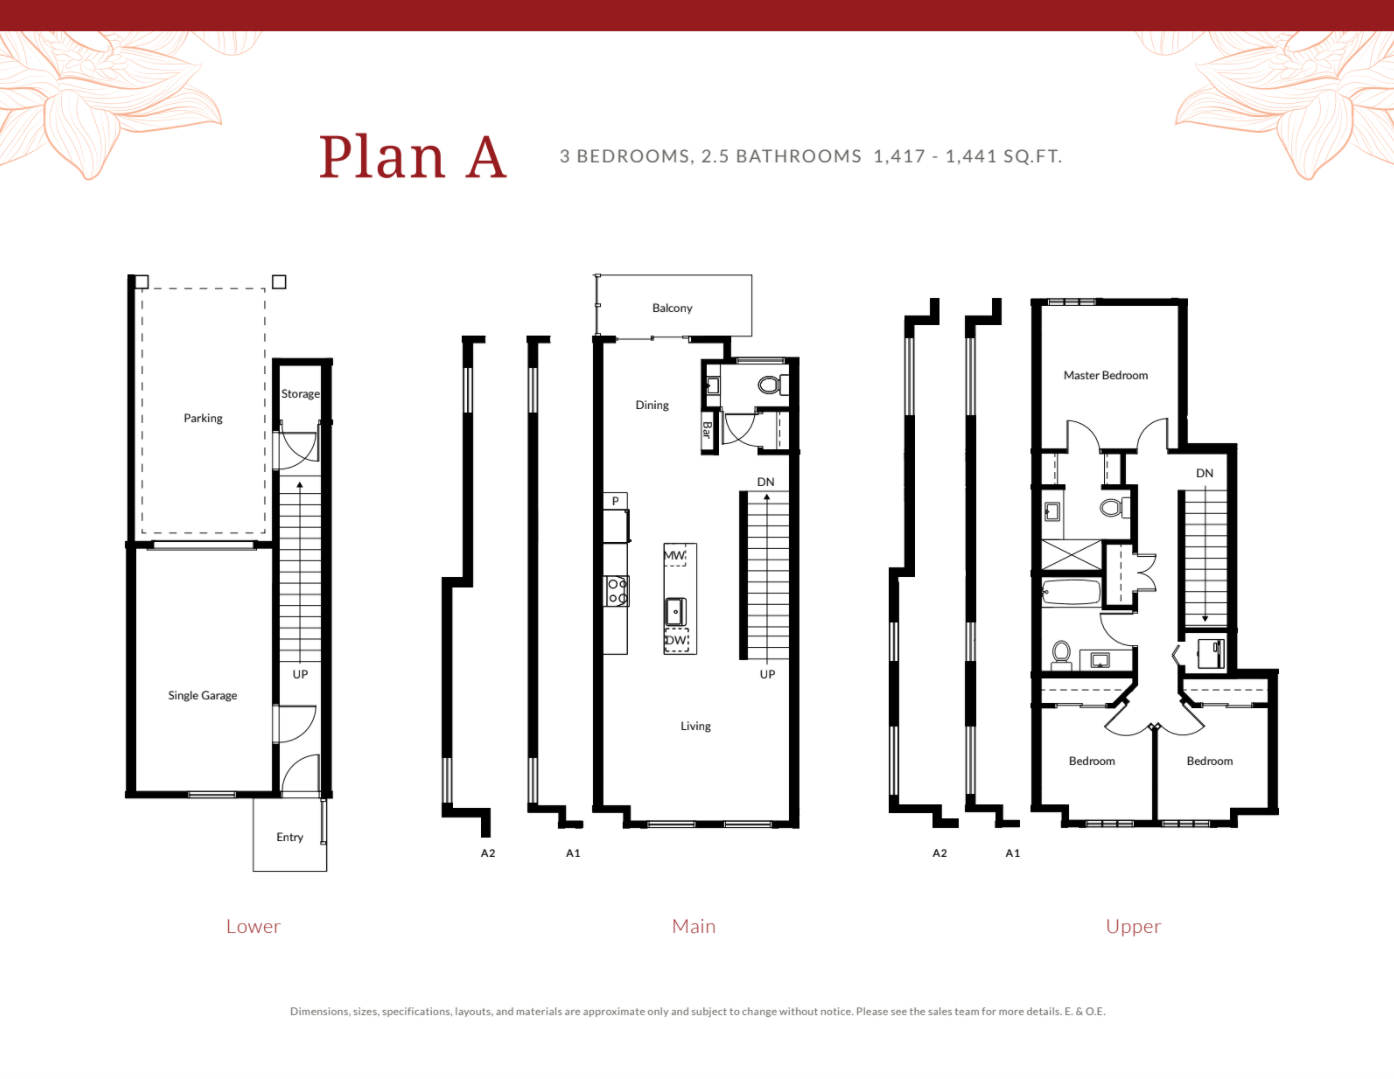  Plan A  Floor Plan of Hepburn Towns with undefined beds